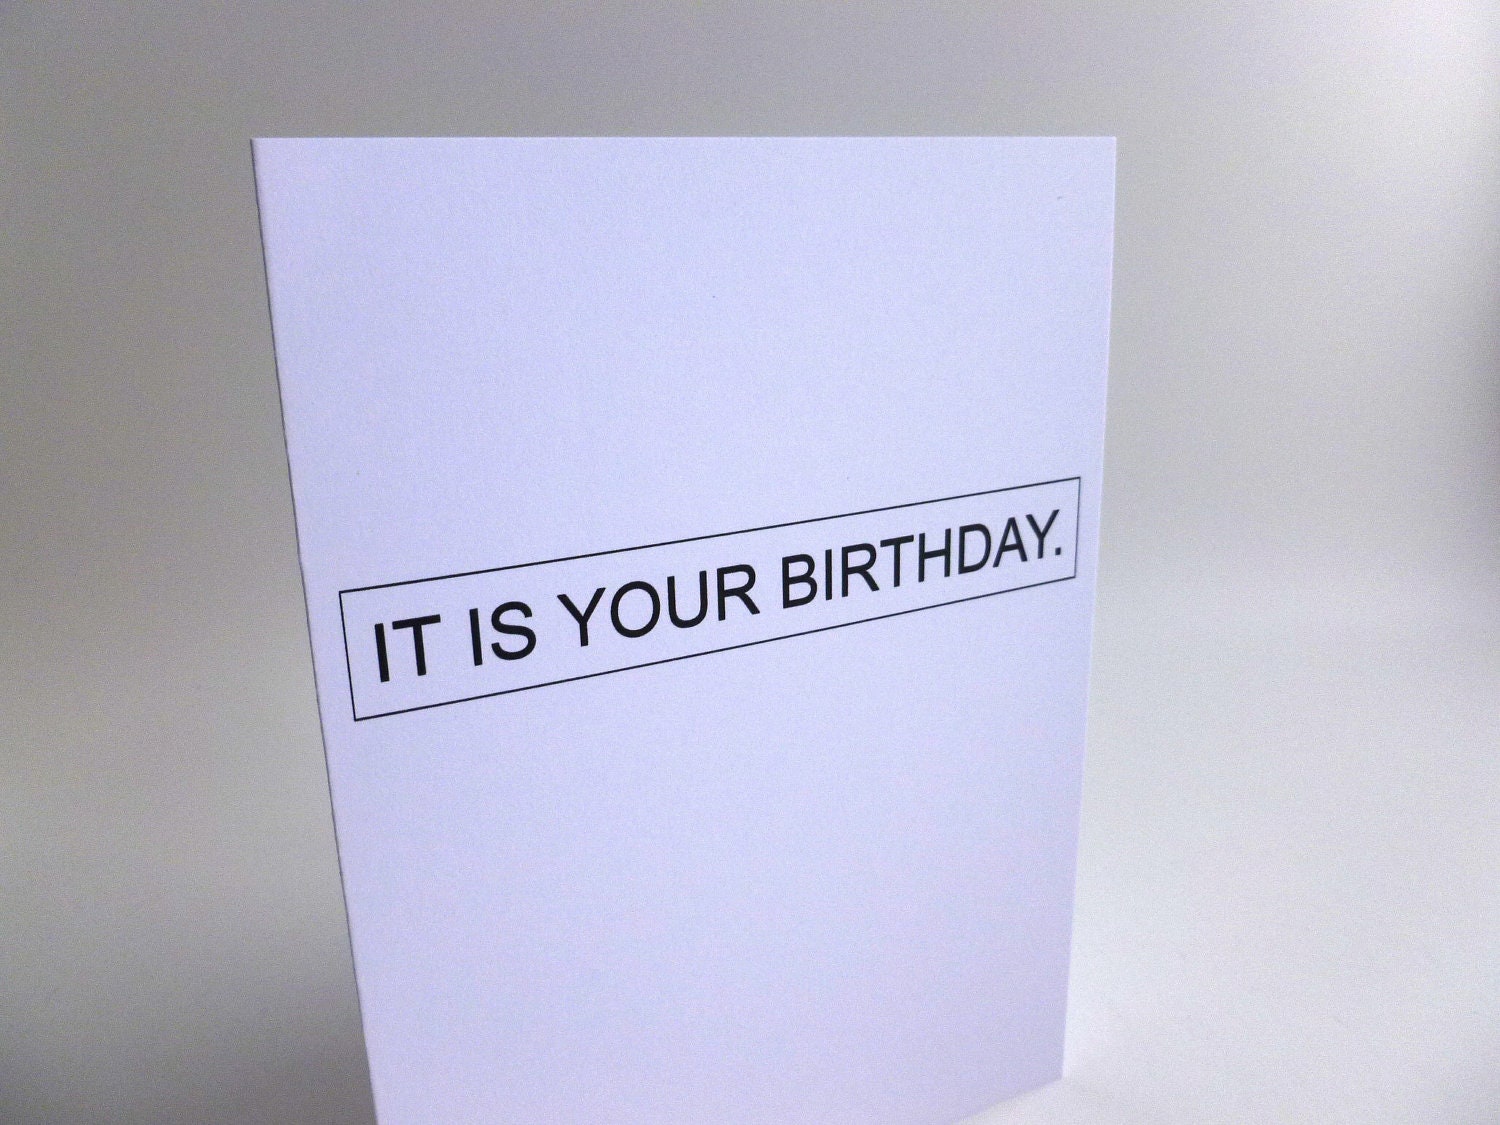 Funny birthday card - It is your birthday. - quote from tv show The